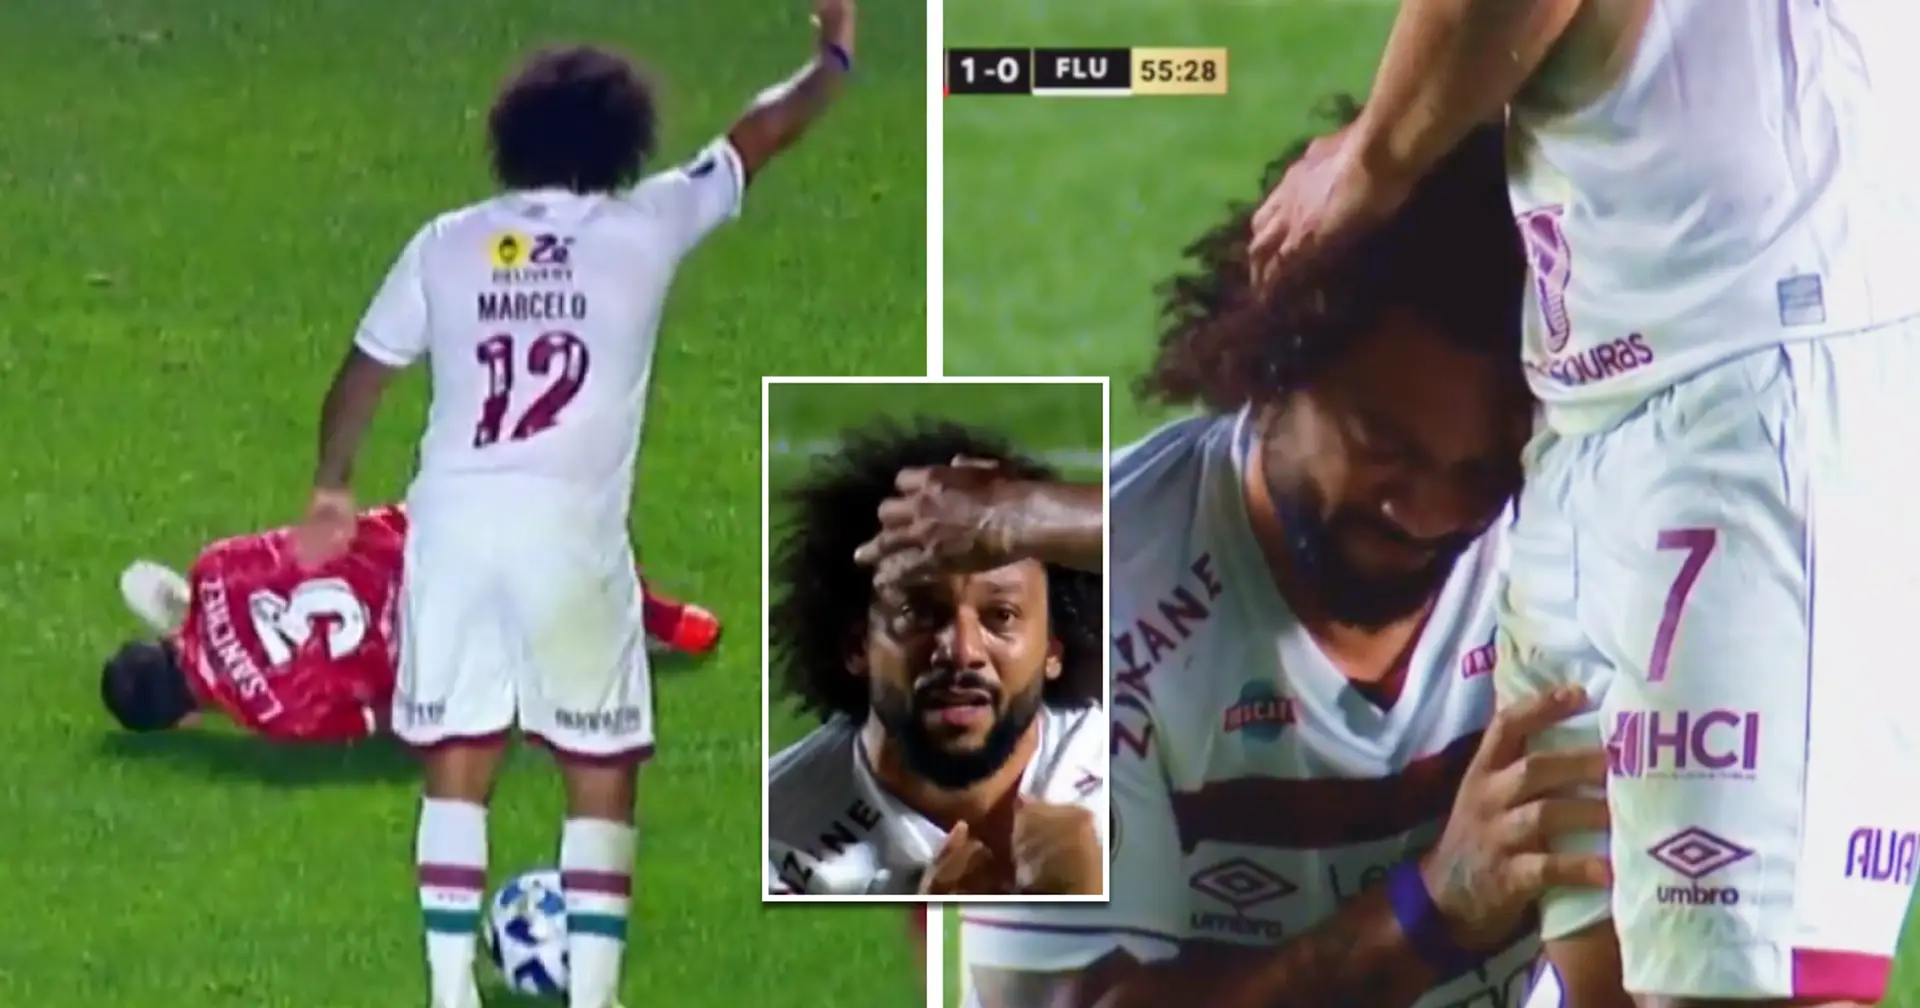 Marcelo causes NSFW leg break by inadvertently stomping on opponent's leg while dribbling